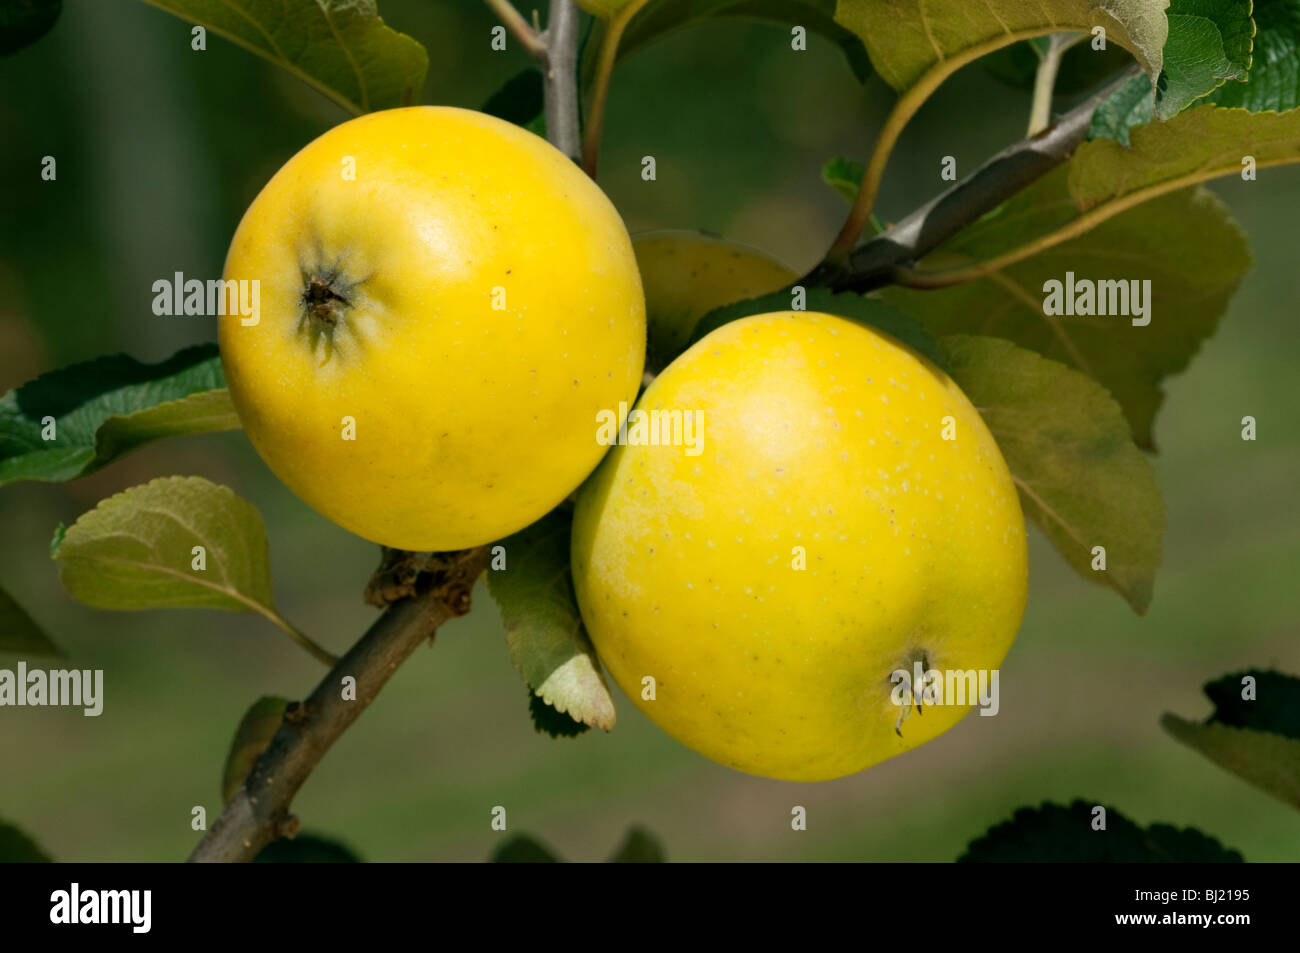 Domestic Apple (Malus domestica), variety: Ananasrenette, apples on a tree. Stock Photo